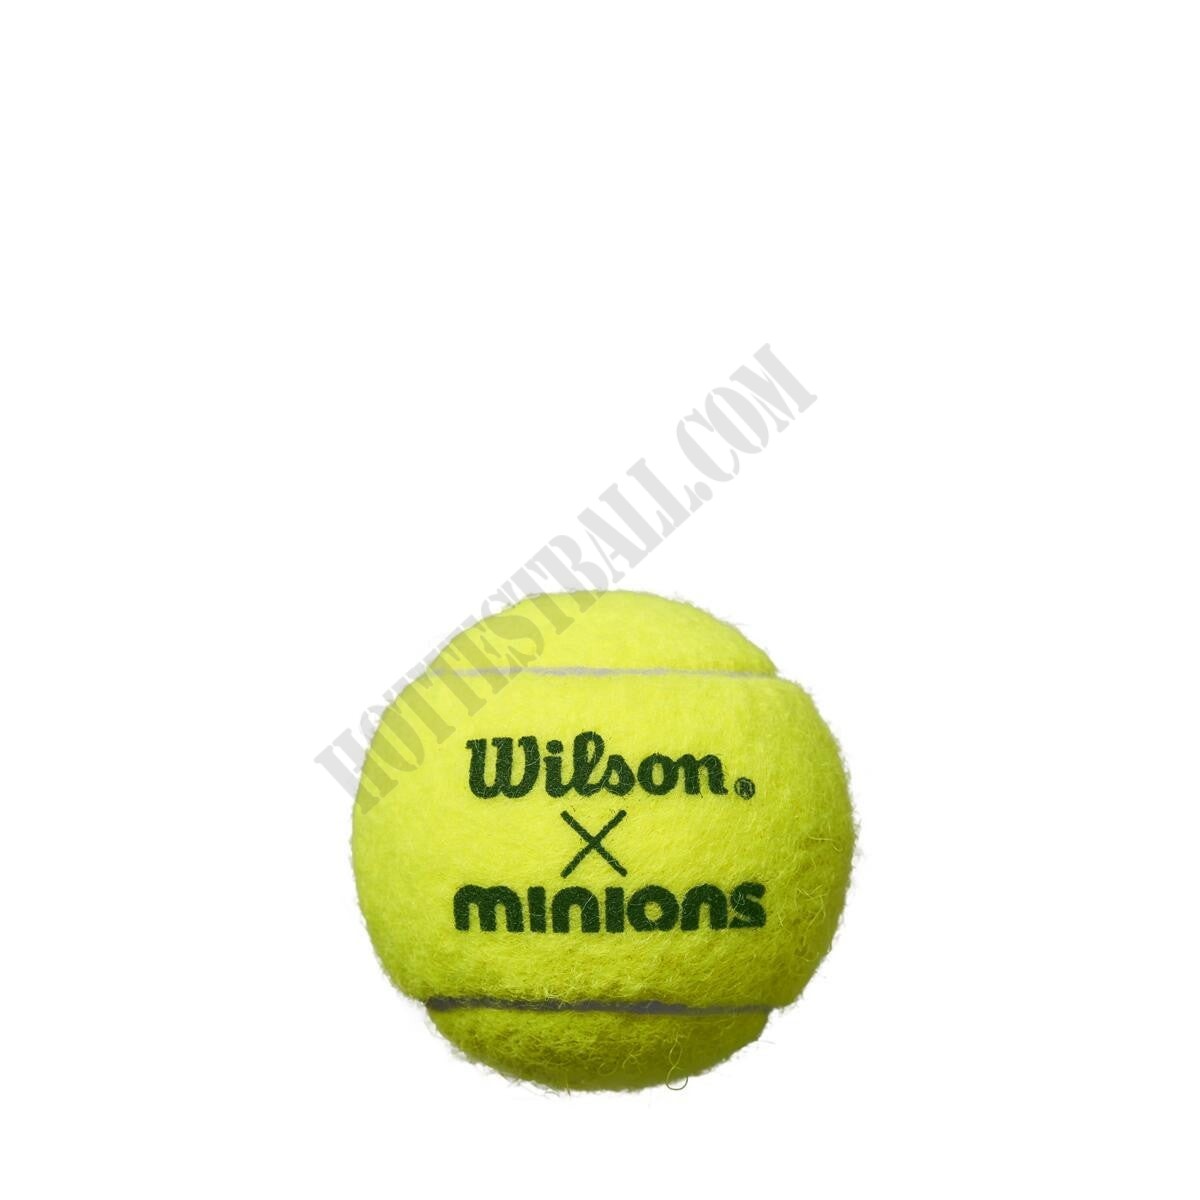 Minions Stage 1 Tennis BCan - Wilson Discount Store - -4